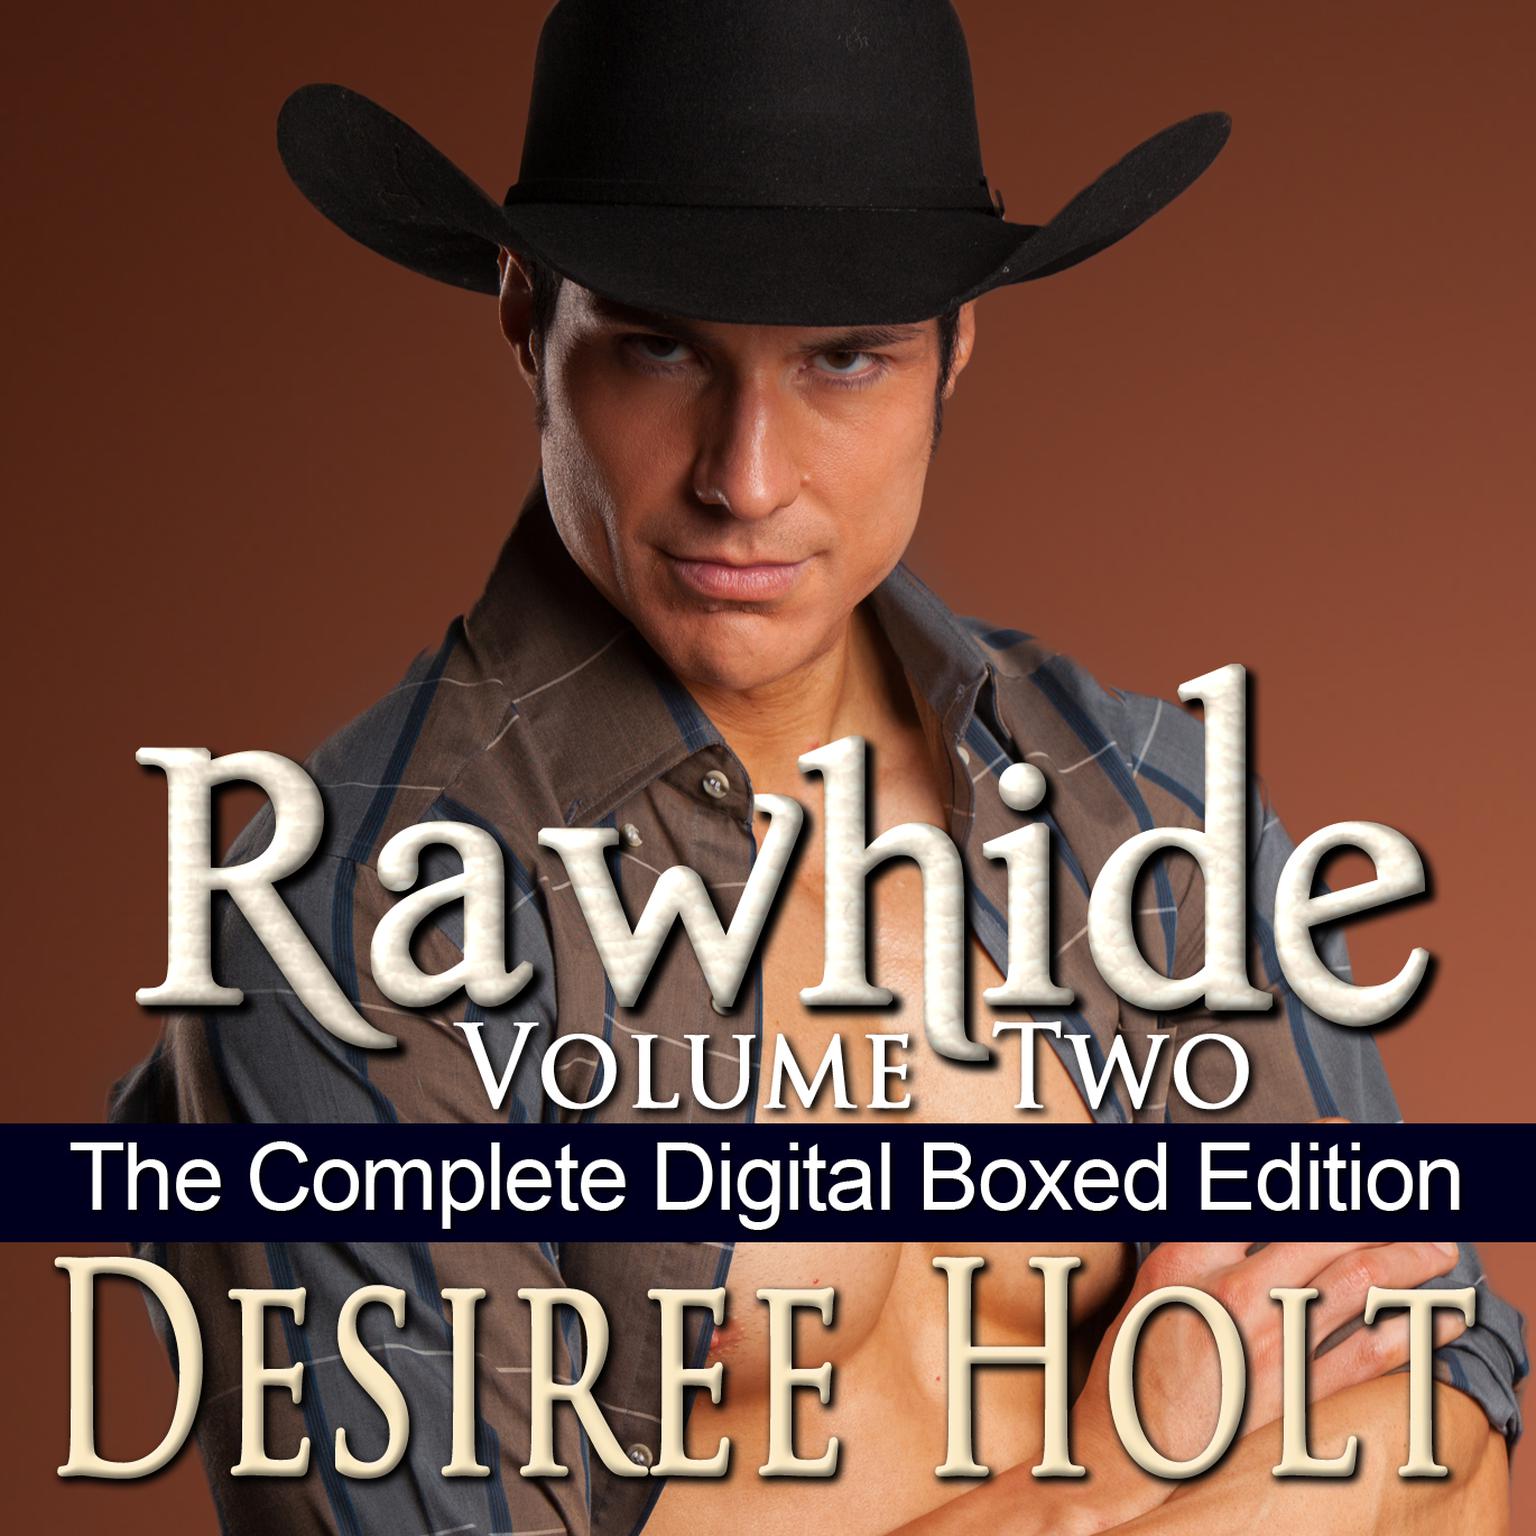 Rawhide, Volume Two Audiobook, by Desiree Holt